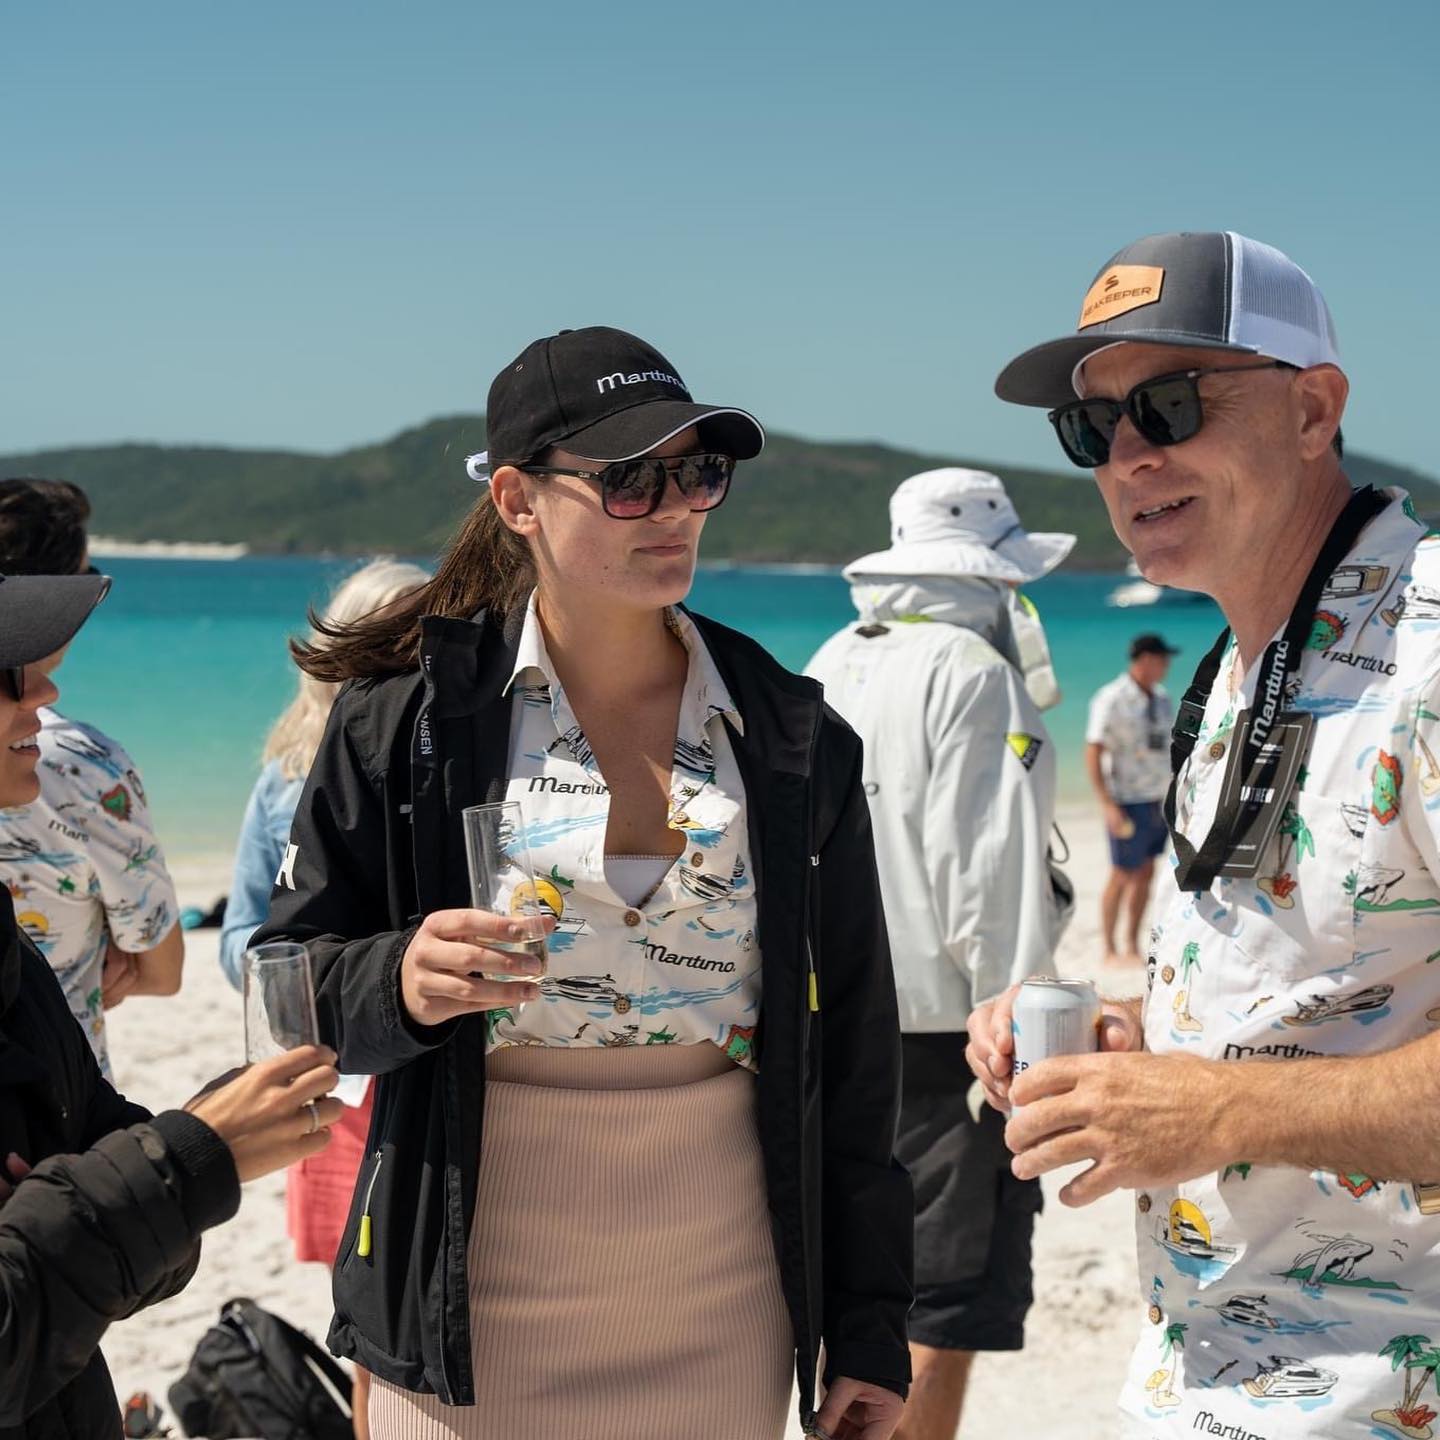 Maritimo Luxury Yachts, GC - Customised Uniforms & Merch designed exclusively for an owners event on Hamilton Island, QLD. 